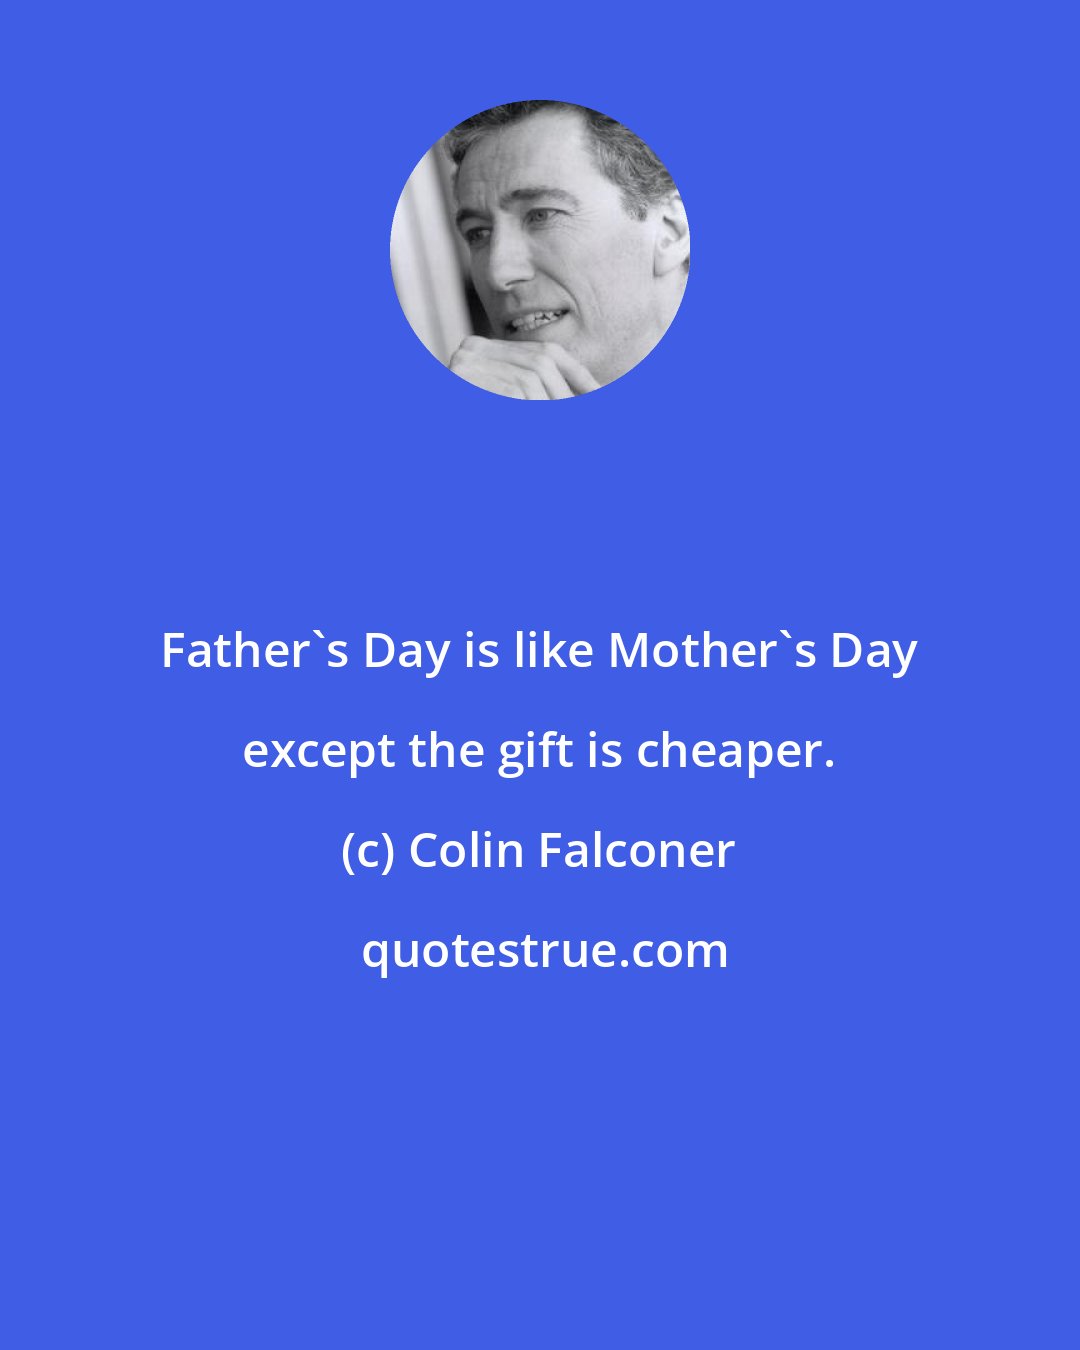 Colin Falconer: Father's Day is like Mother's Day except the gift is cheaper.